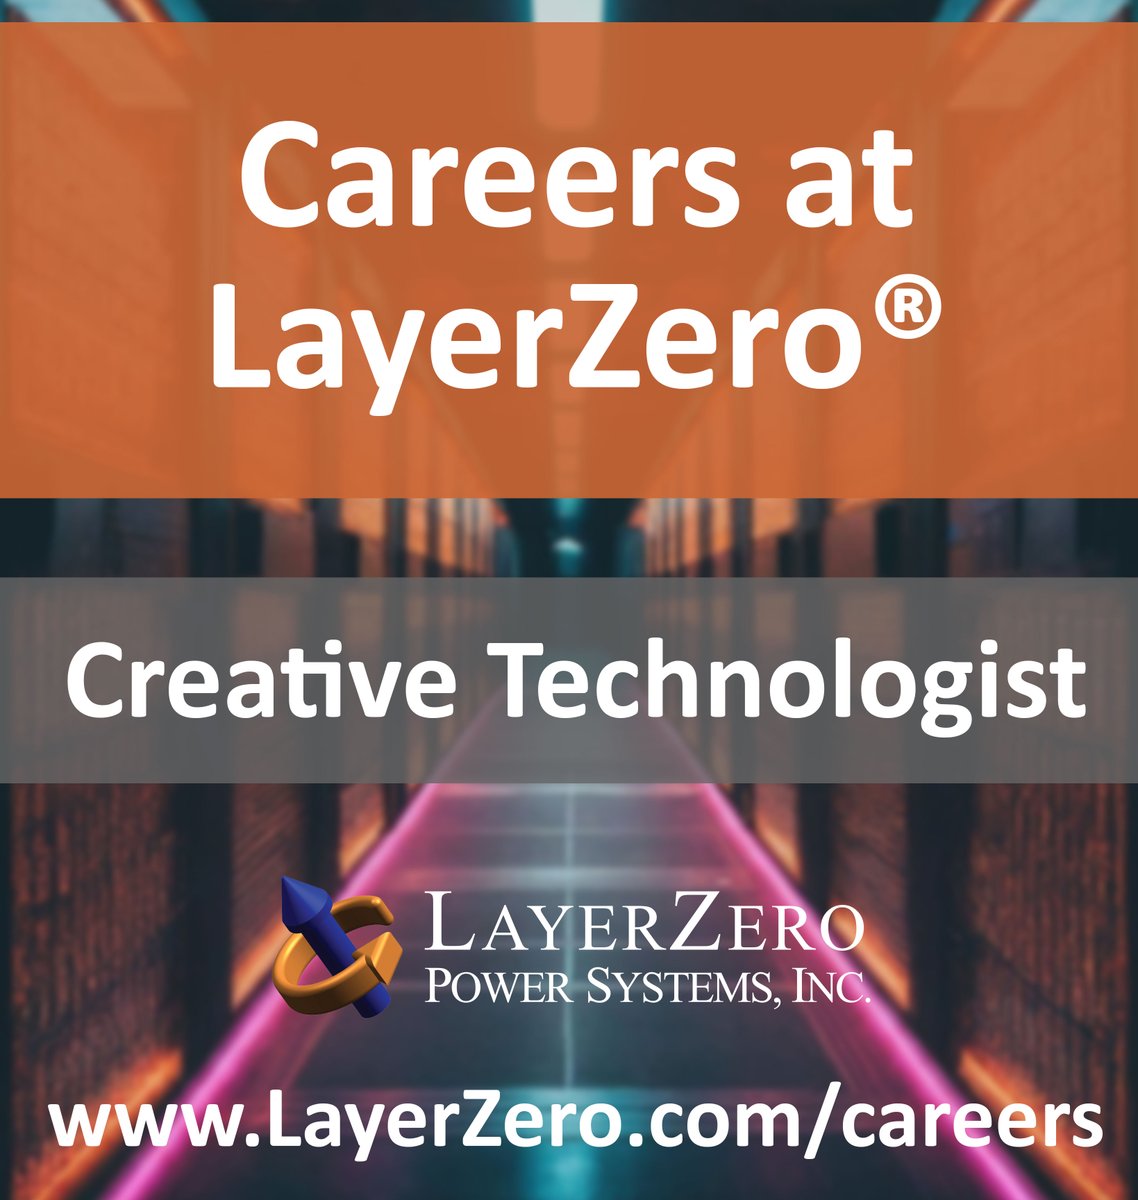 Ready to unleash your creativity & tech skills?

LayerZero®, one of Ohio's fastest-growing tech companies, is hiring a Creative Technologist! Apply now & join the innovation:

layerzero.com/Corporate/Care…

#LayerZero #OhioJobs #CreativeJobs